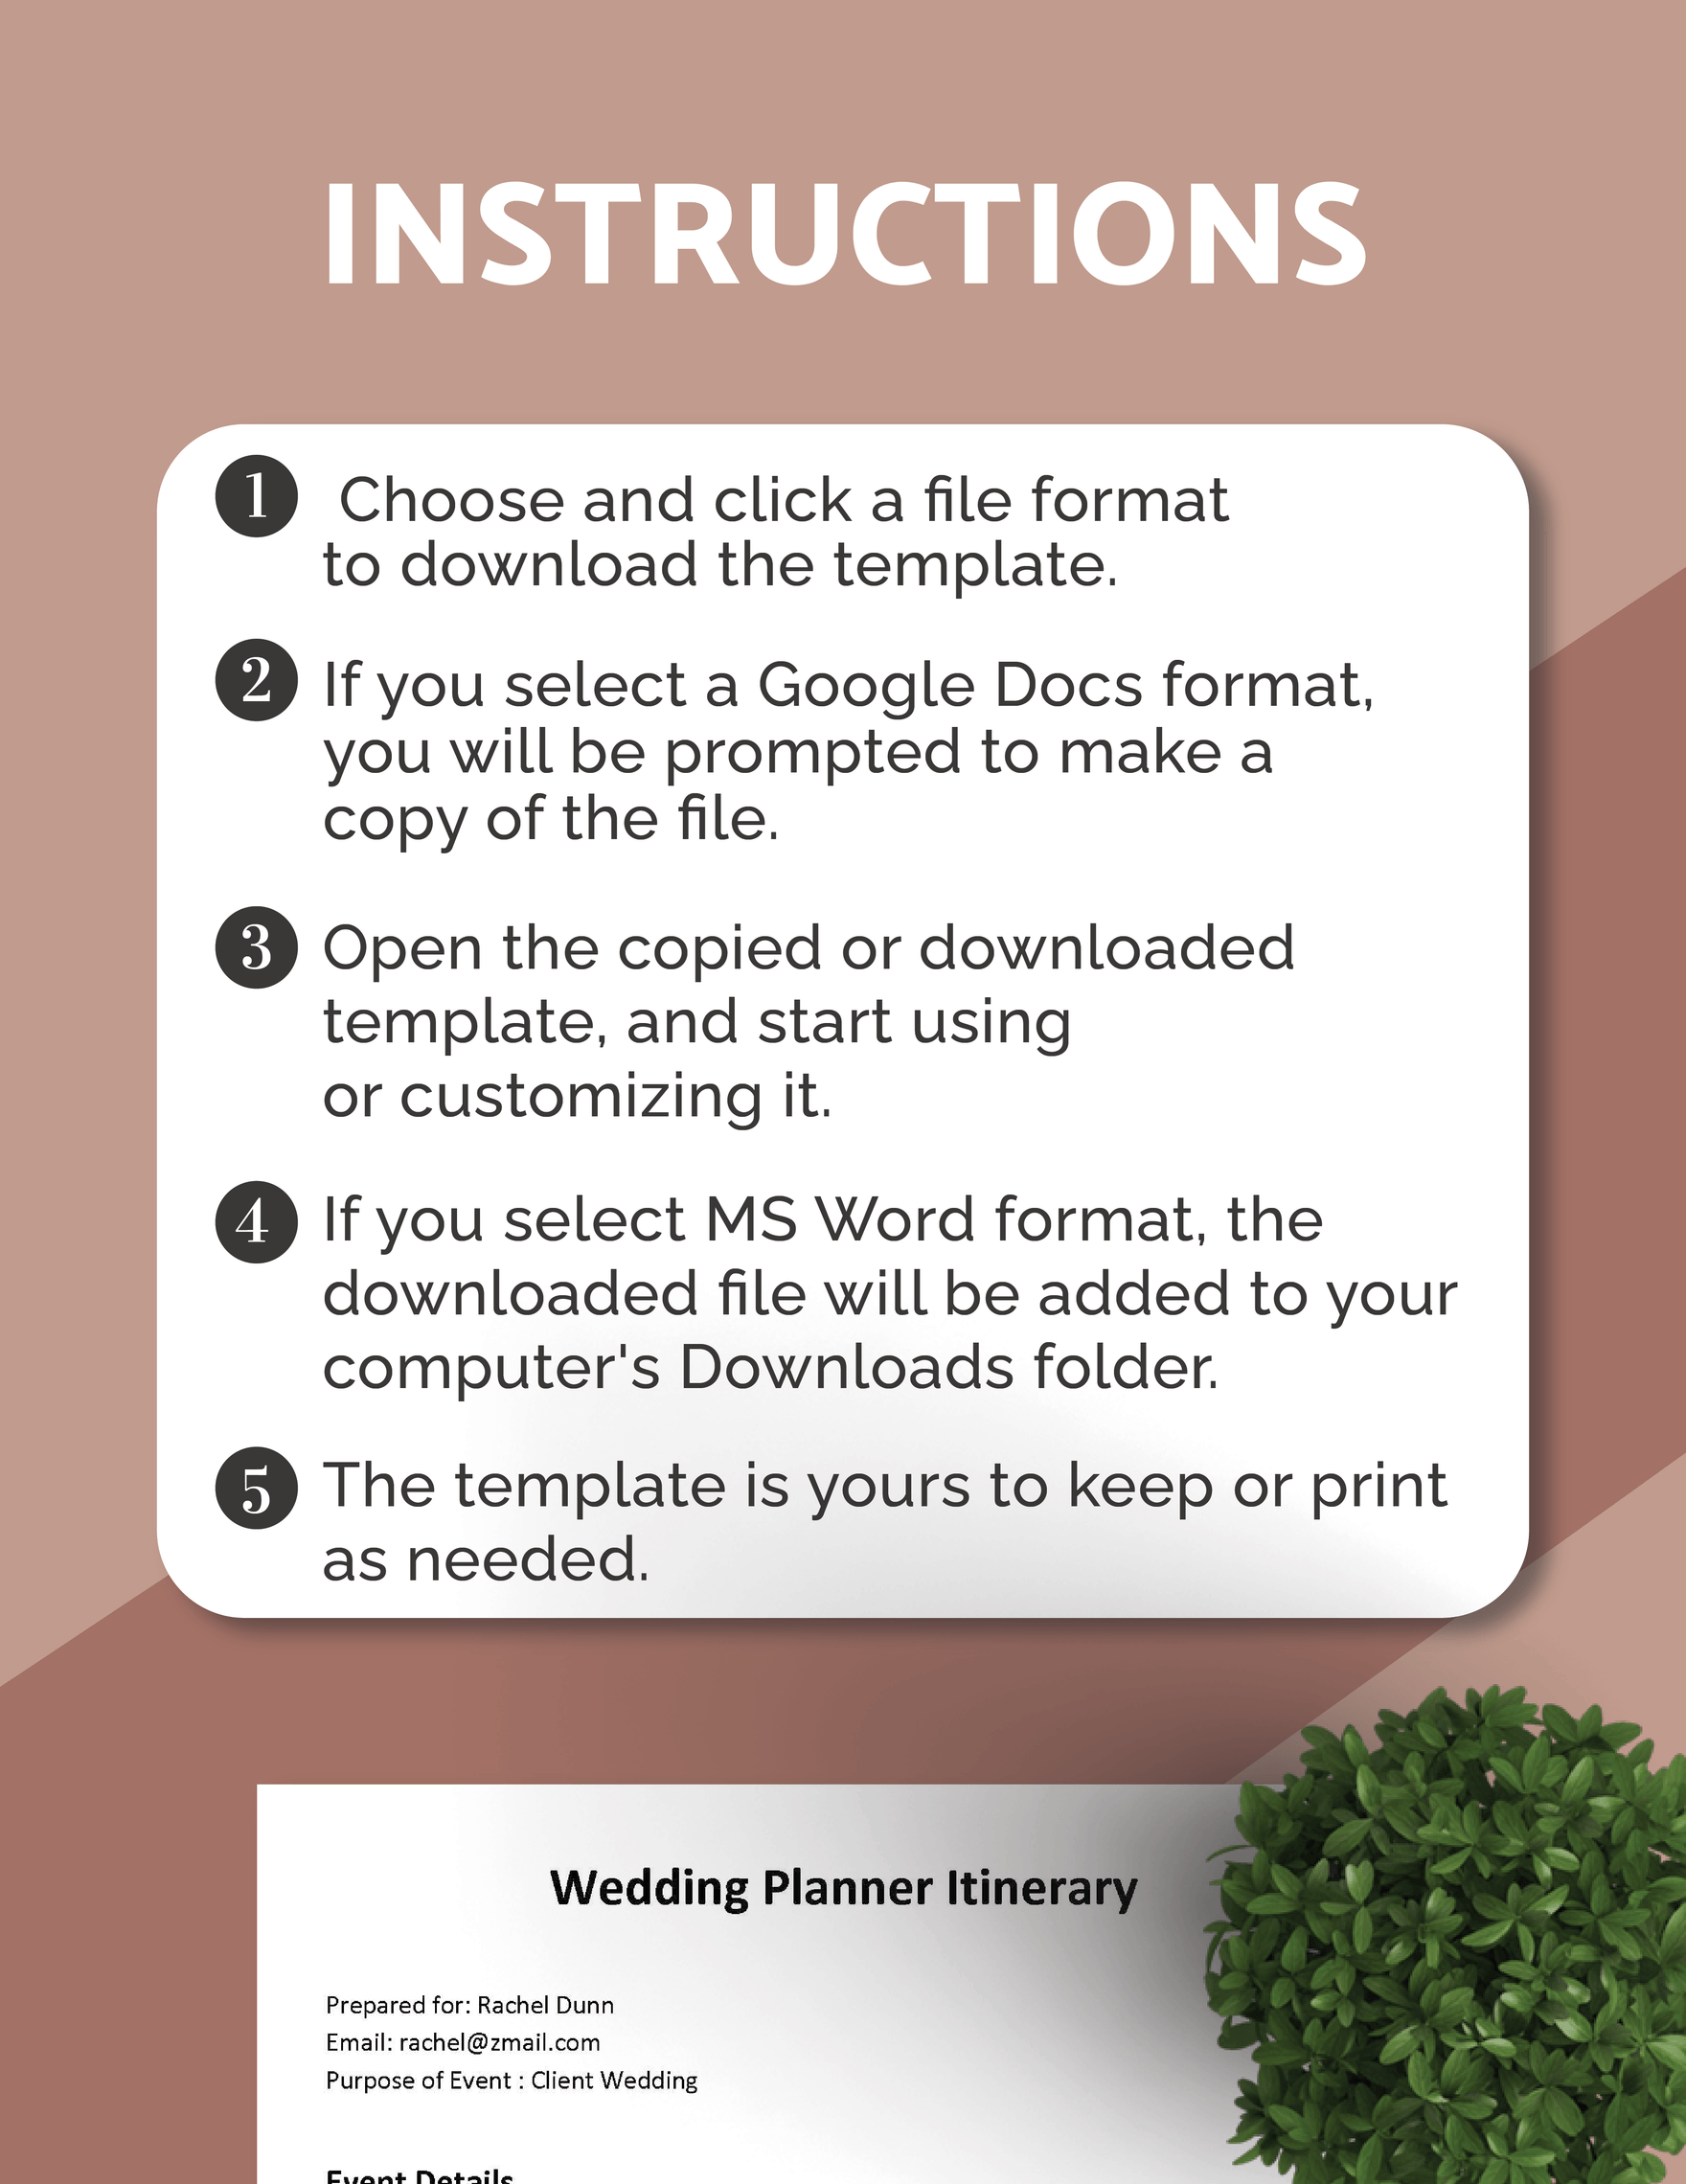 Wedding Planner Itinerary Template